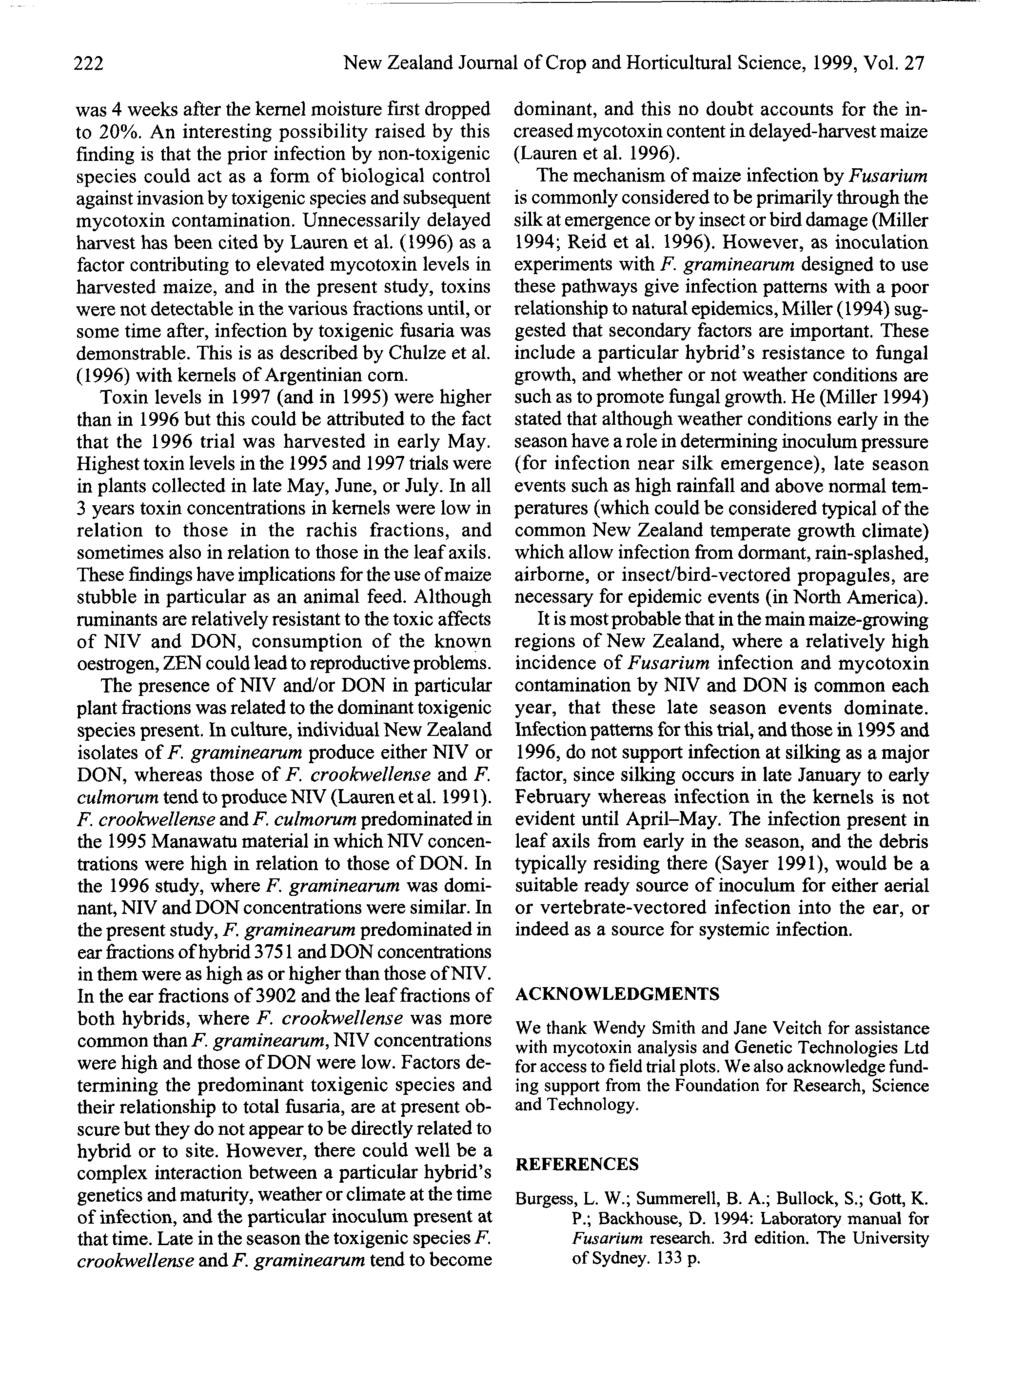 222 New Zealand Journal of Crop and Horticultural Science, 1999, Vol. 27 was 4 weeks after the kernel moisture first dropped to 20%.